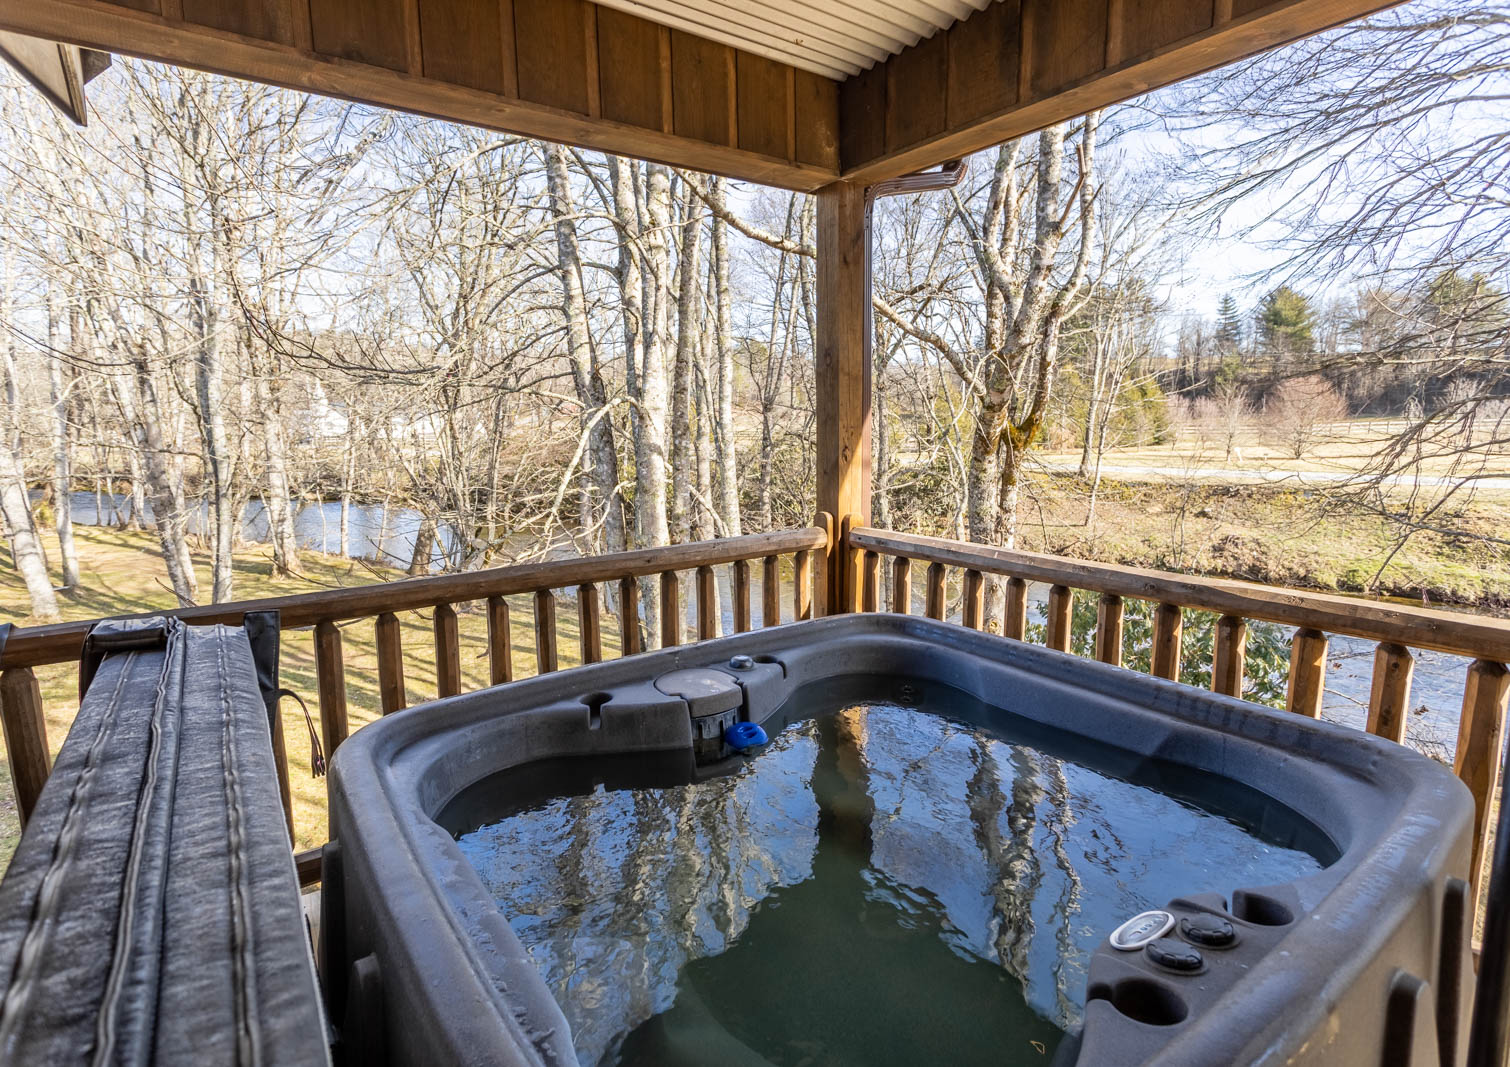 Enjoy the River Flowing by from the Hot Tub on the Covered Deck